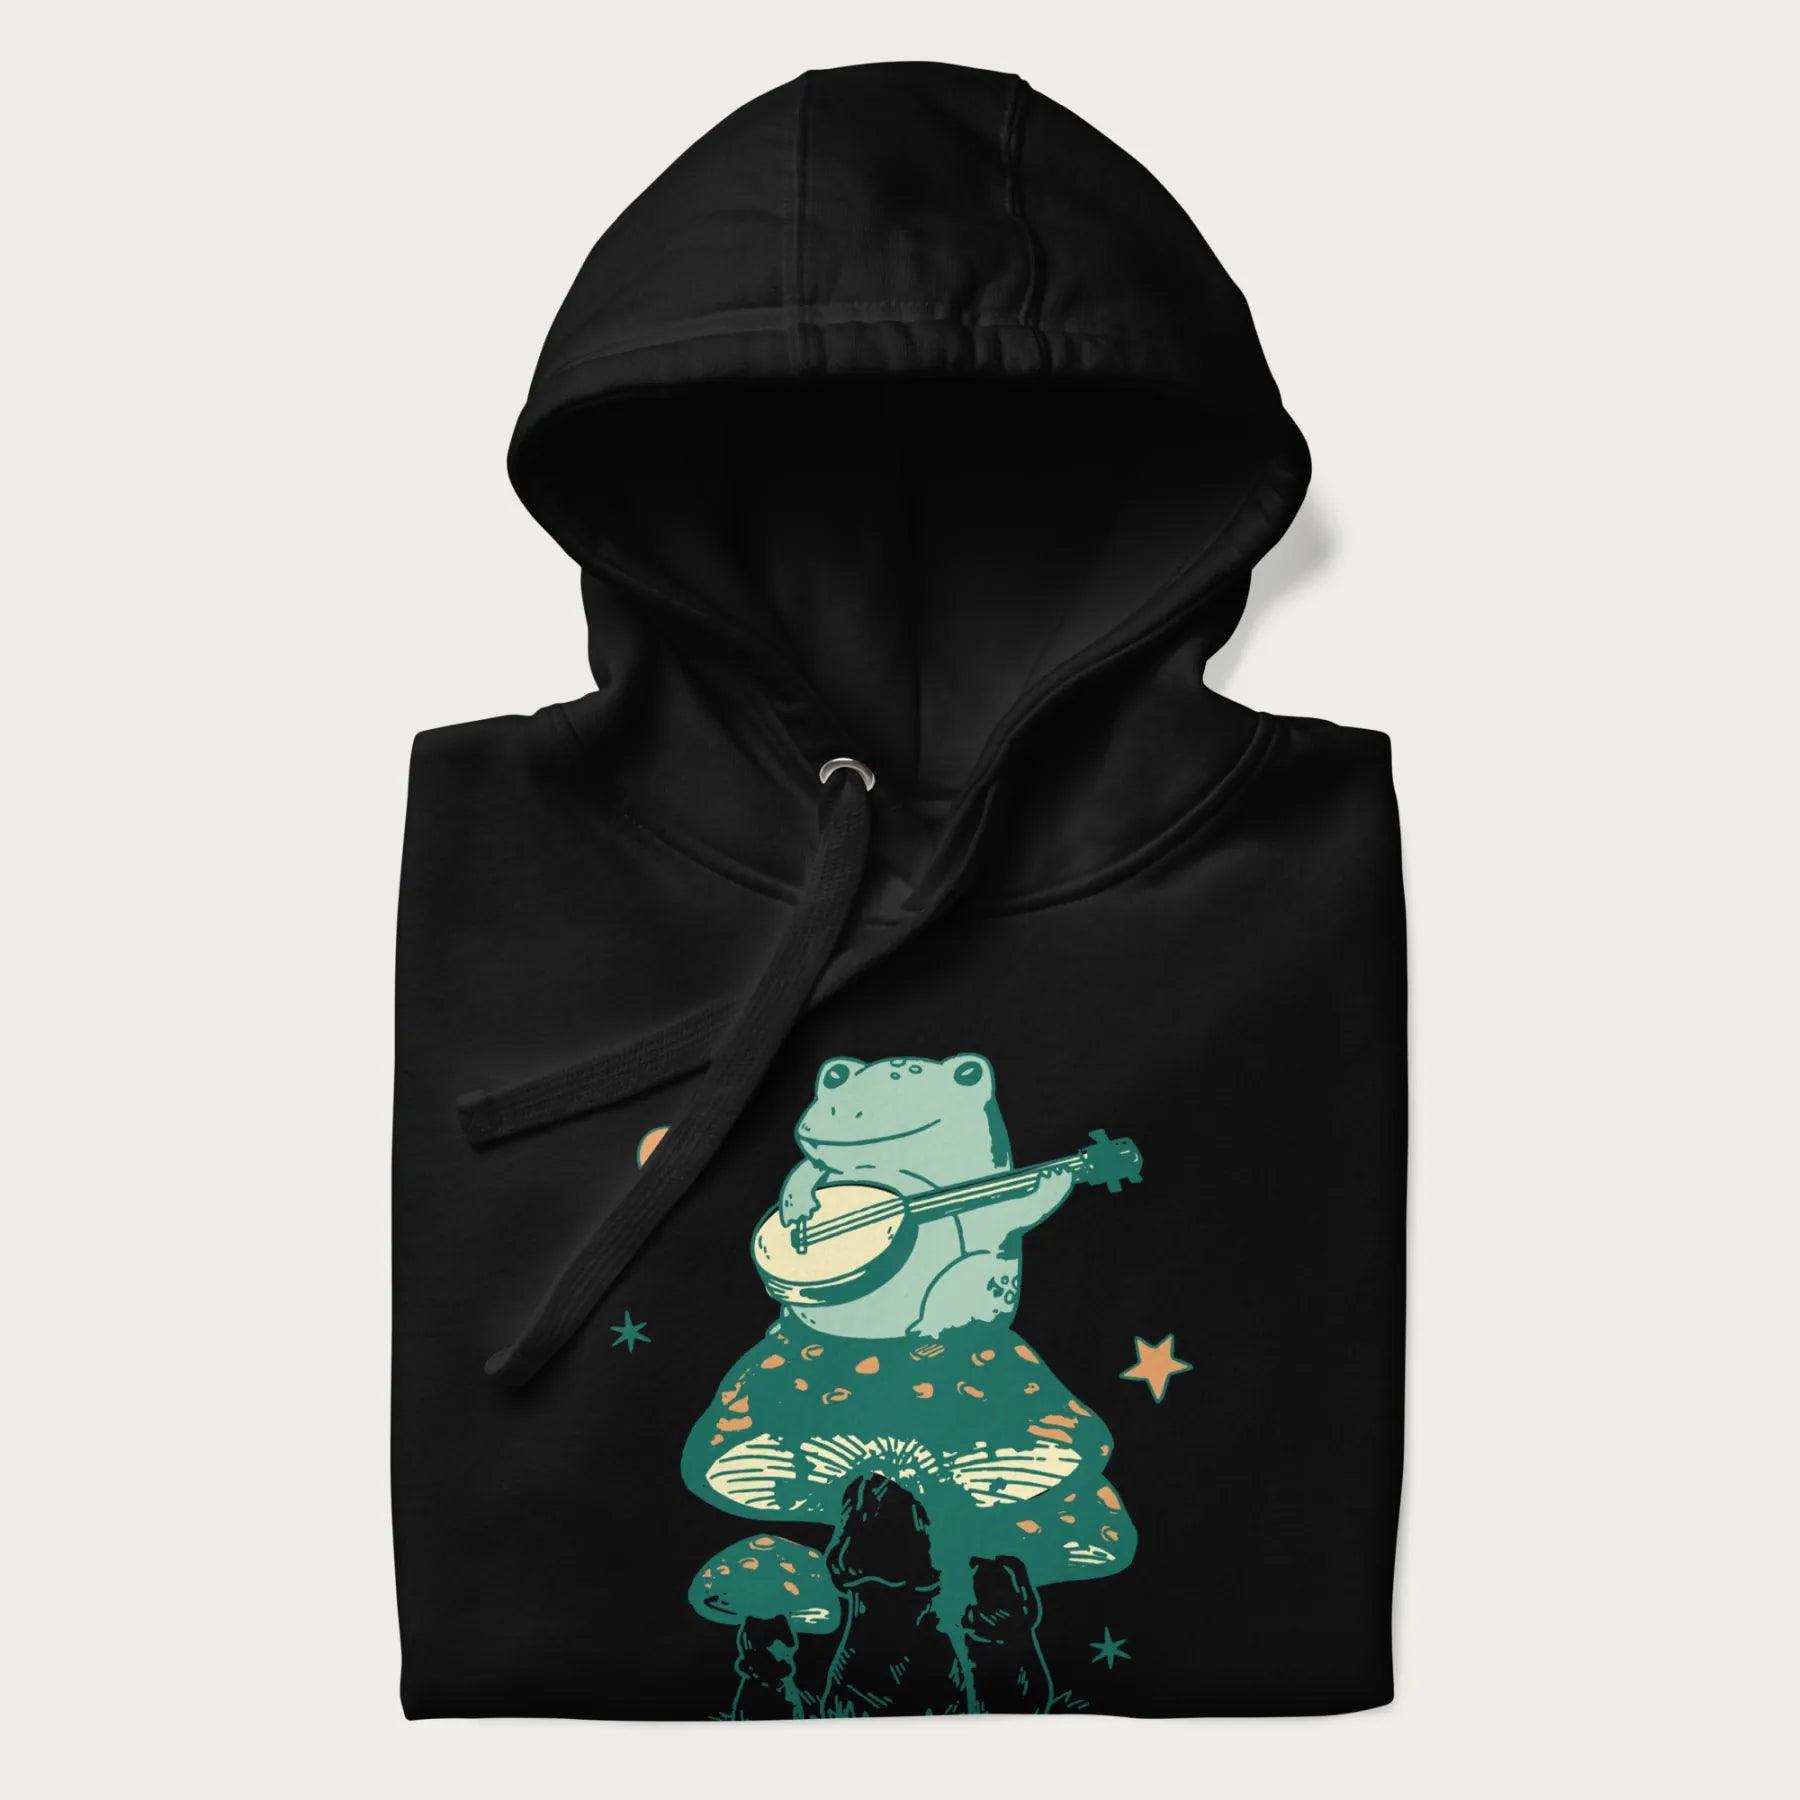 Folded black hoodie with graphic of a frog playing a banjo on a mushroom with stars and a crescent moon.